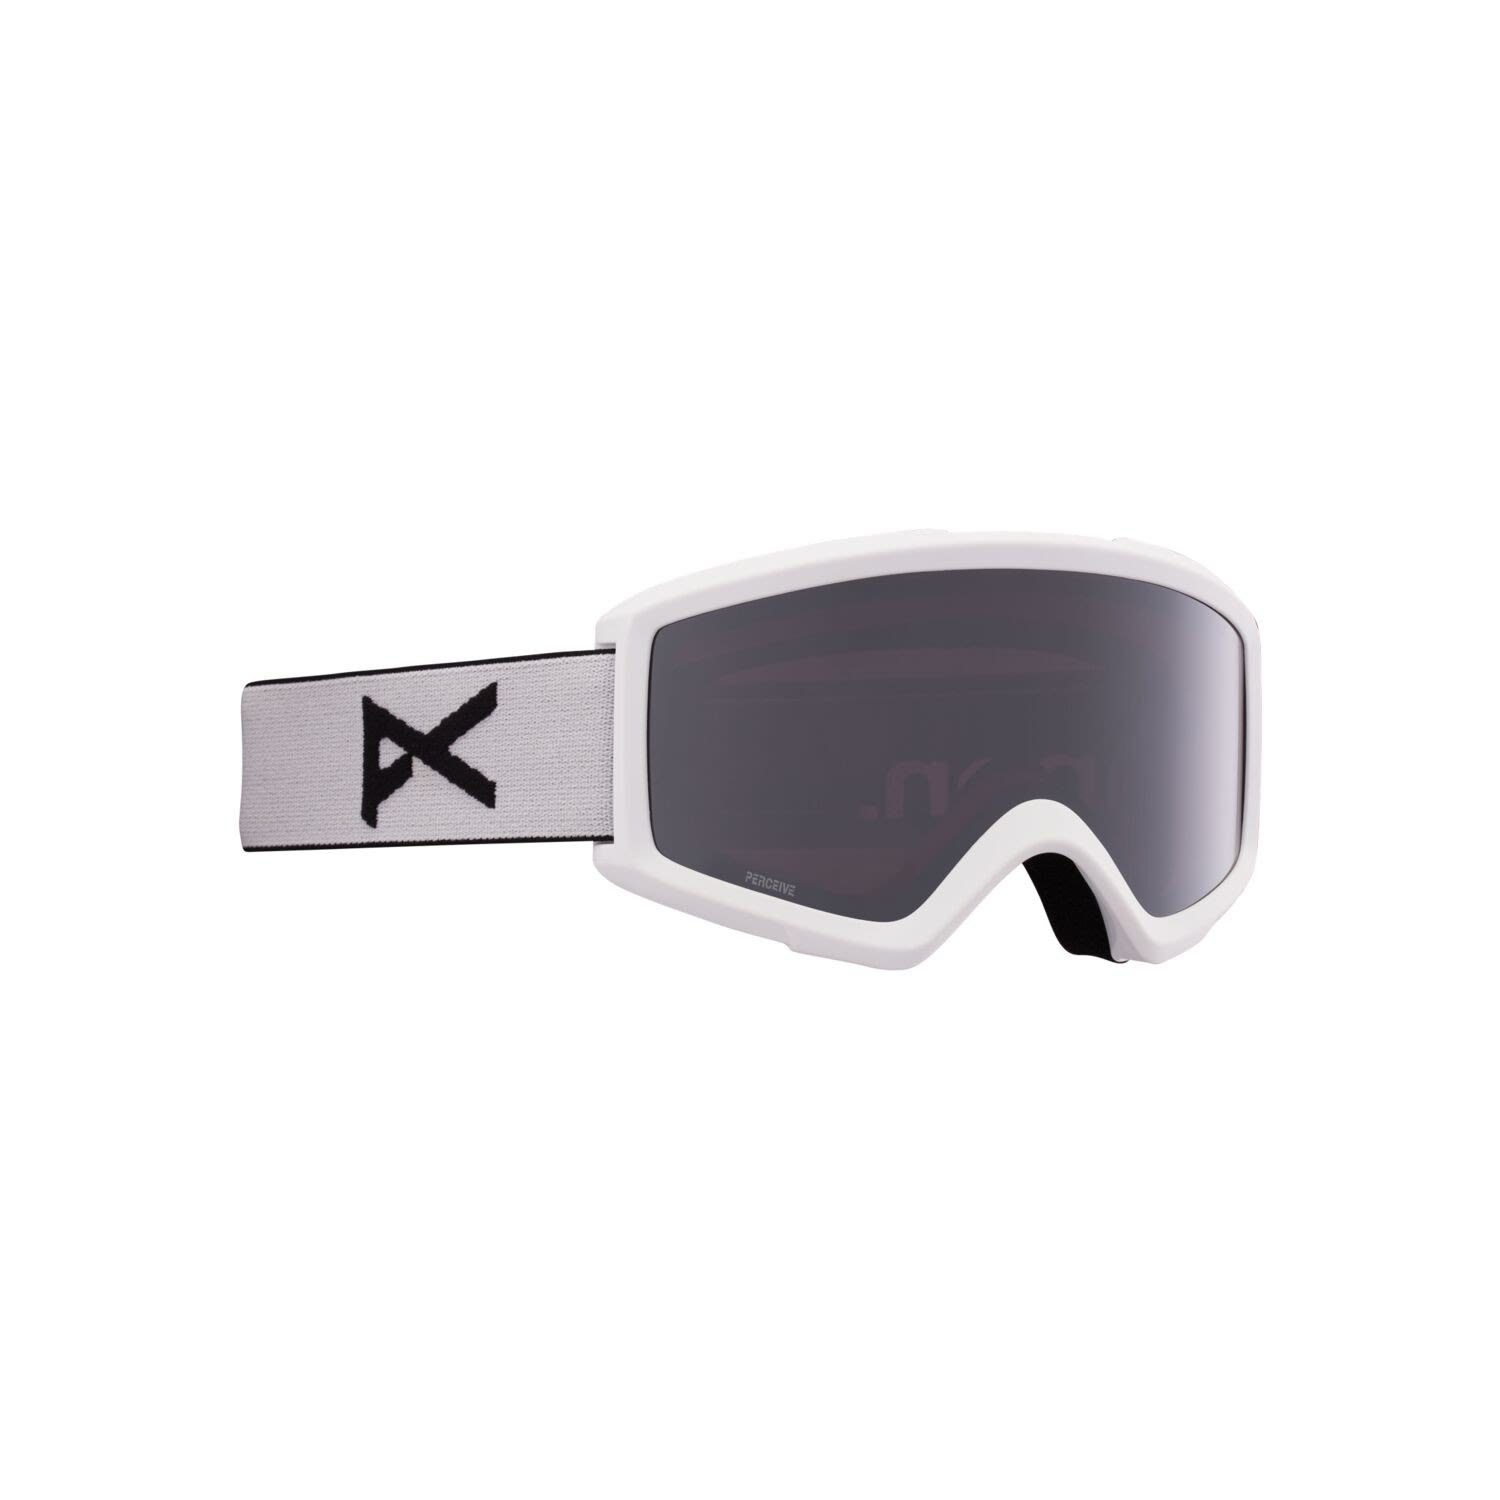 Anon Skibrille Anon Helix 2.0 Perceive With Spare Lens White - Perceive Sunny Onyx - Amber